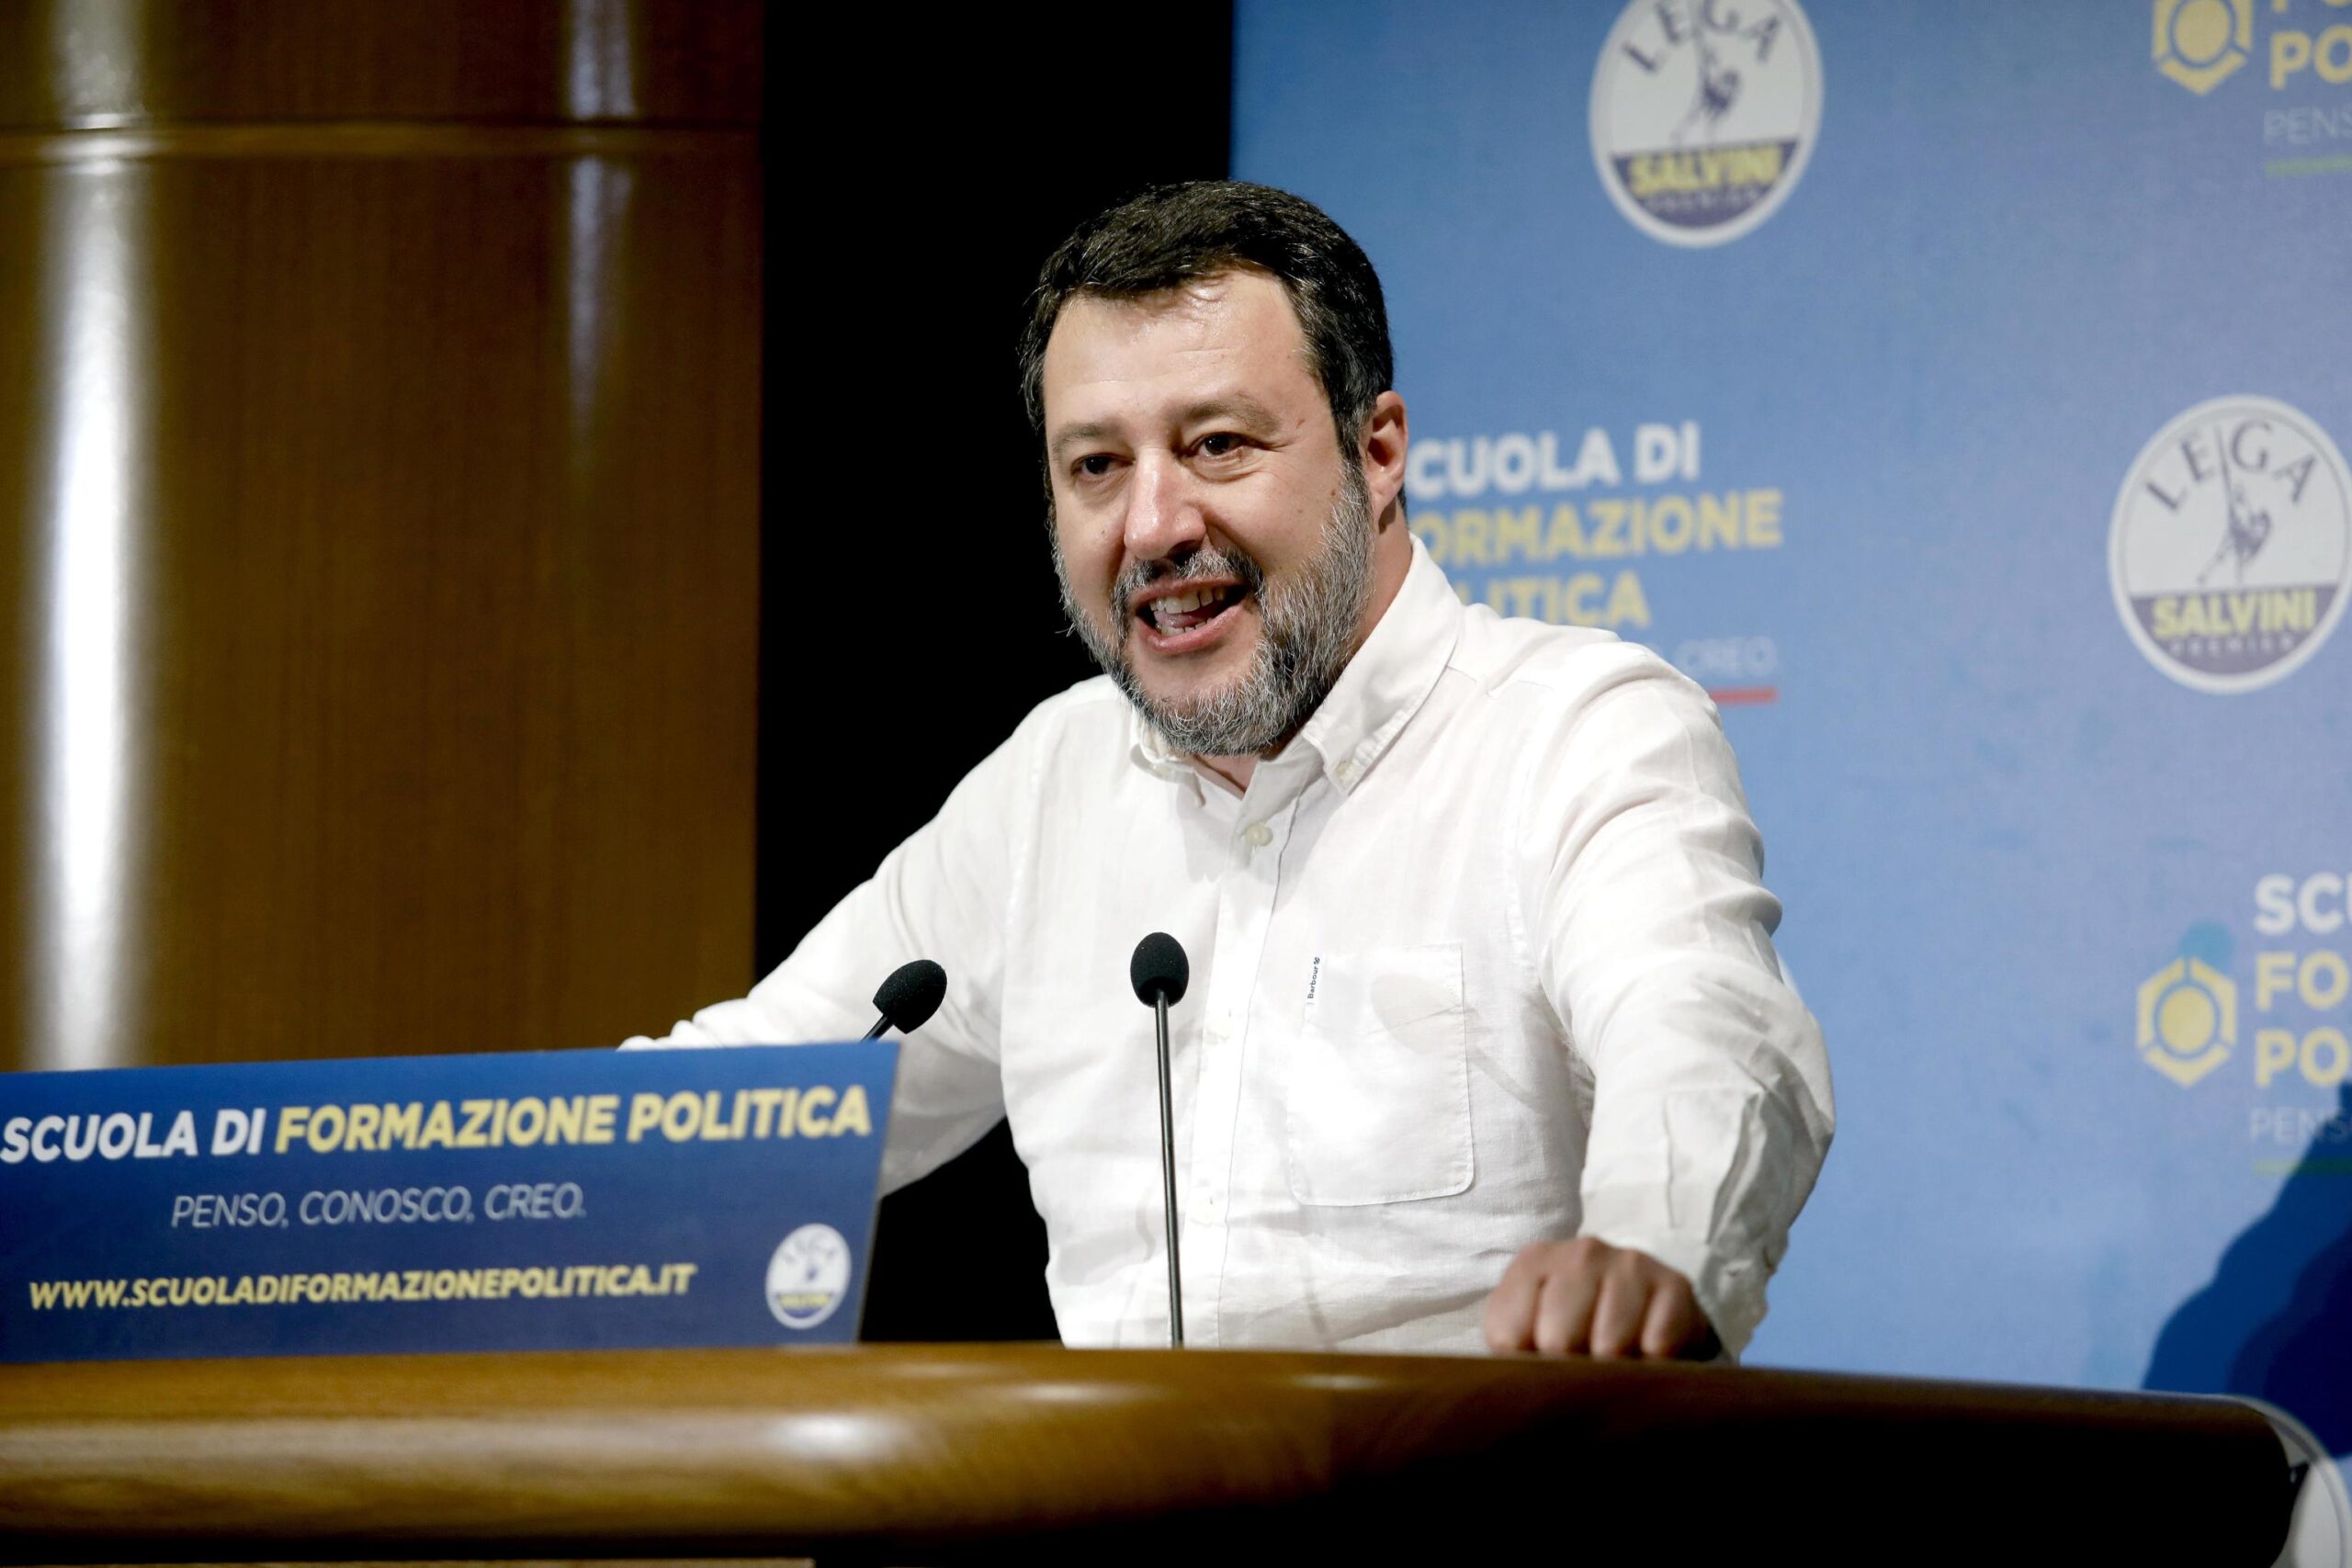 Salvini in Le Figaro: “The bridge will be built over the strait and will connect Palermo to Berlin”